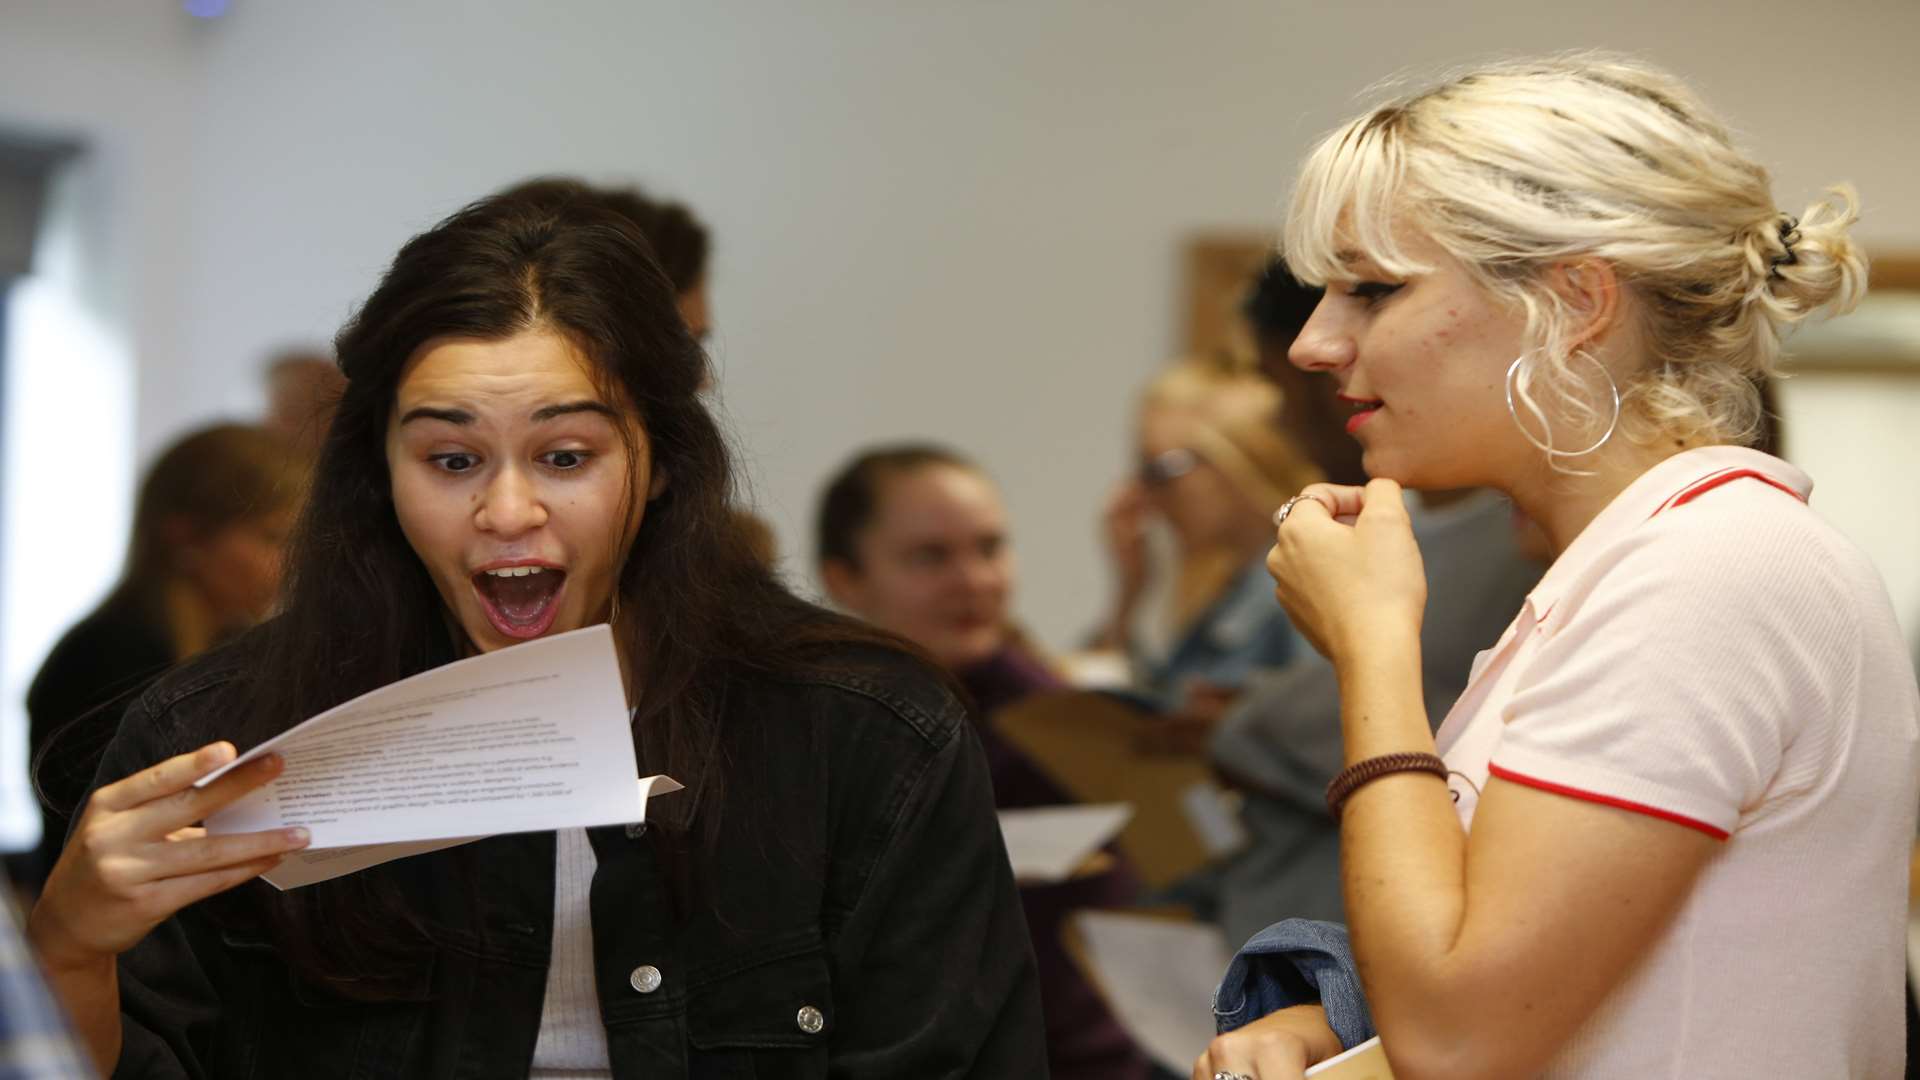 Carys Morgan, left, picks up her A-level results with May Oney at Valley Park secondary school in Maidstone